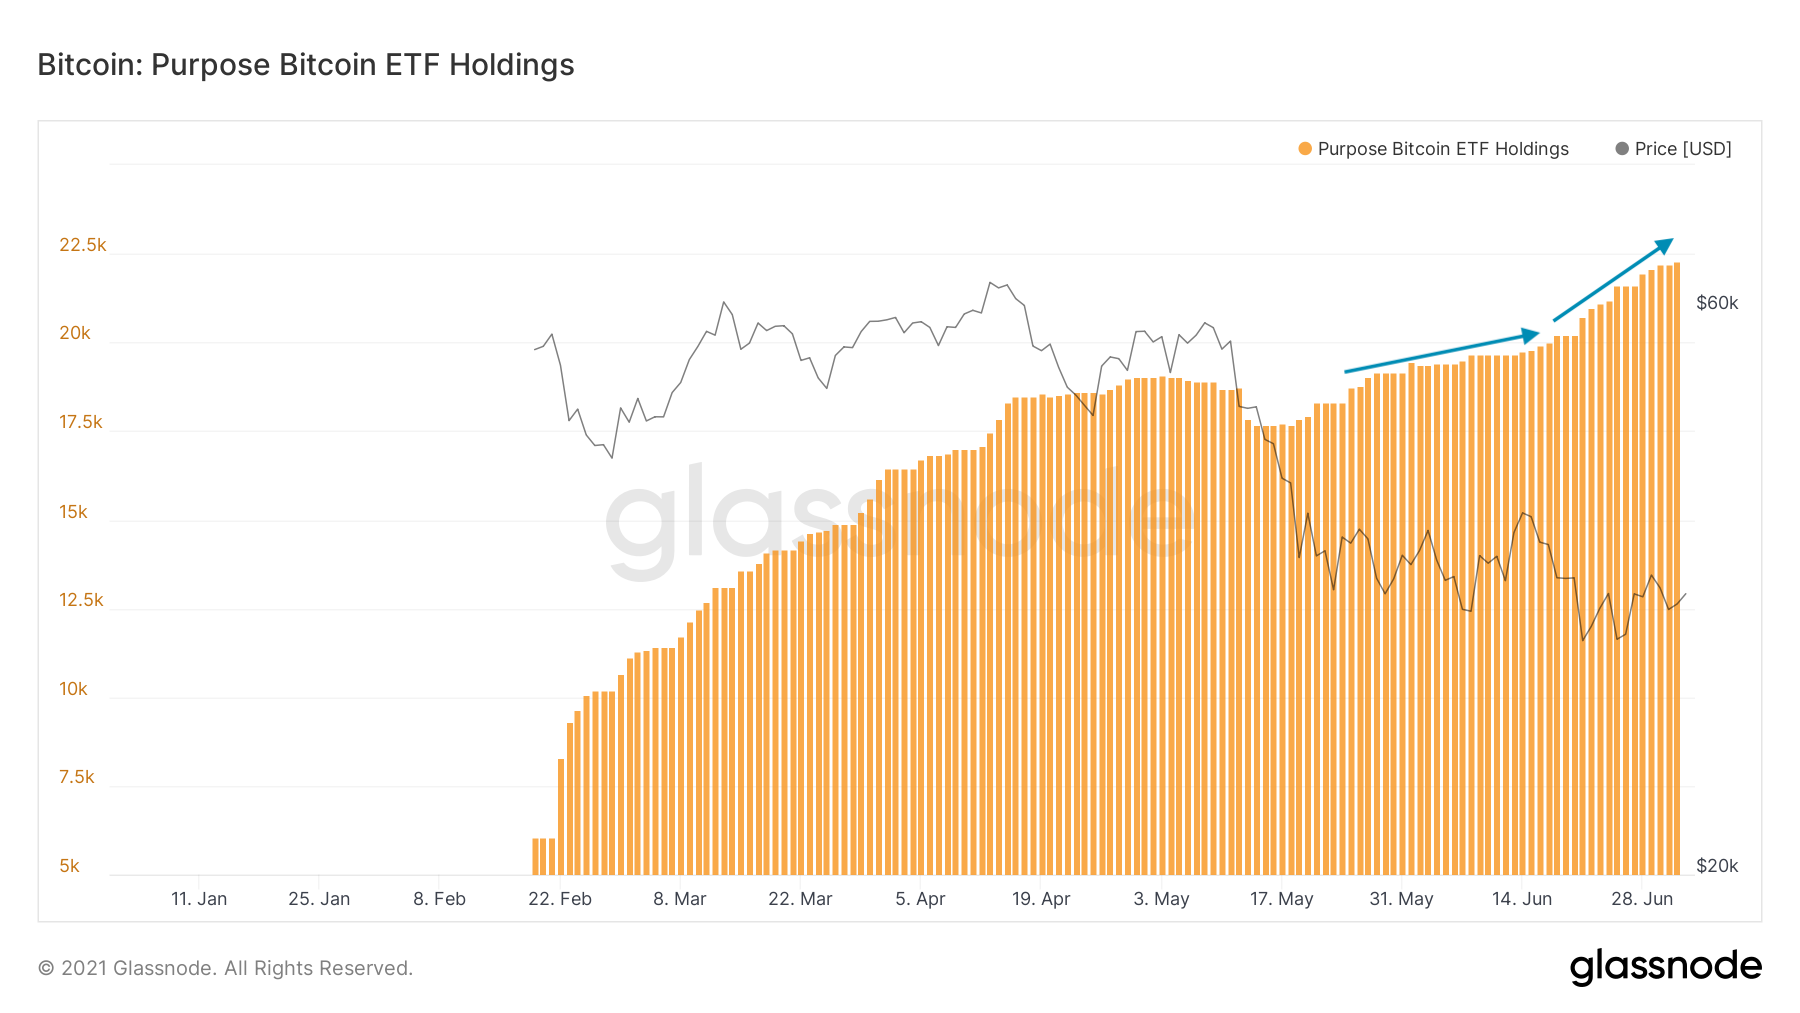 Institutional Demand Persists: The Purpose Bitcoin ETF Now Holds 22,500 BTC